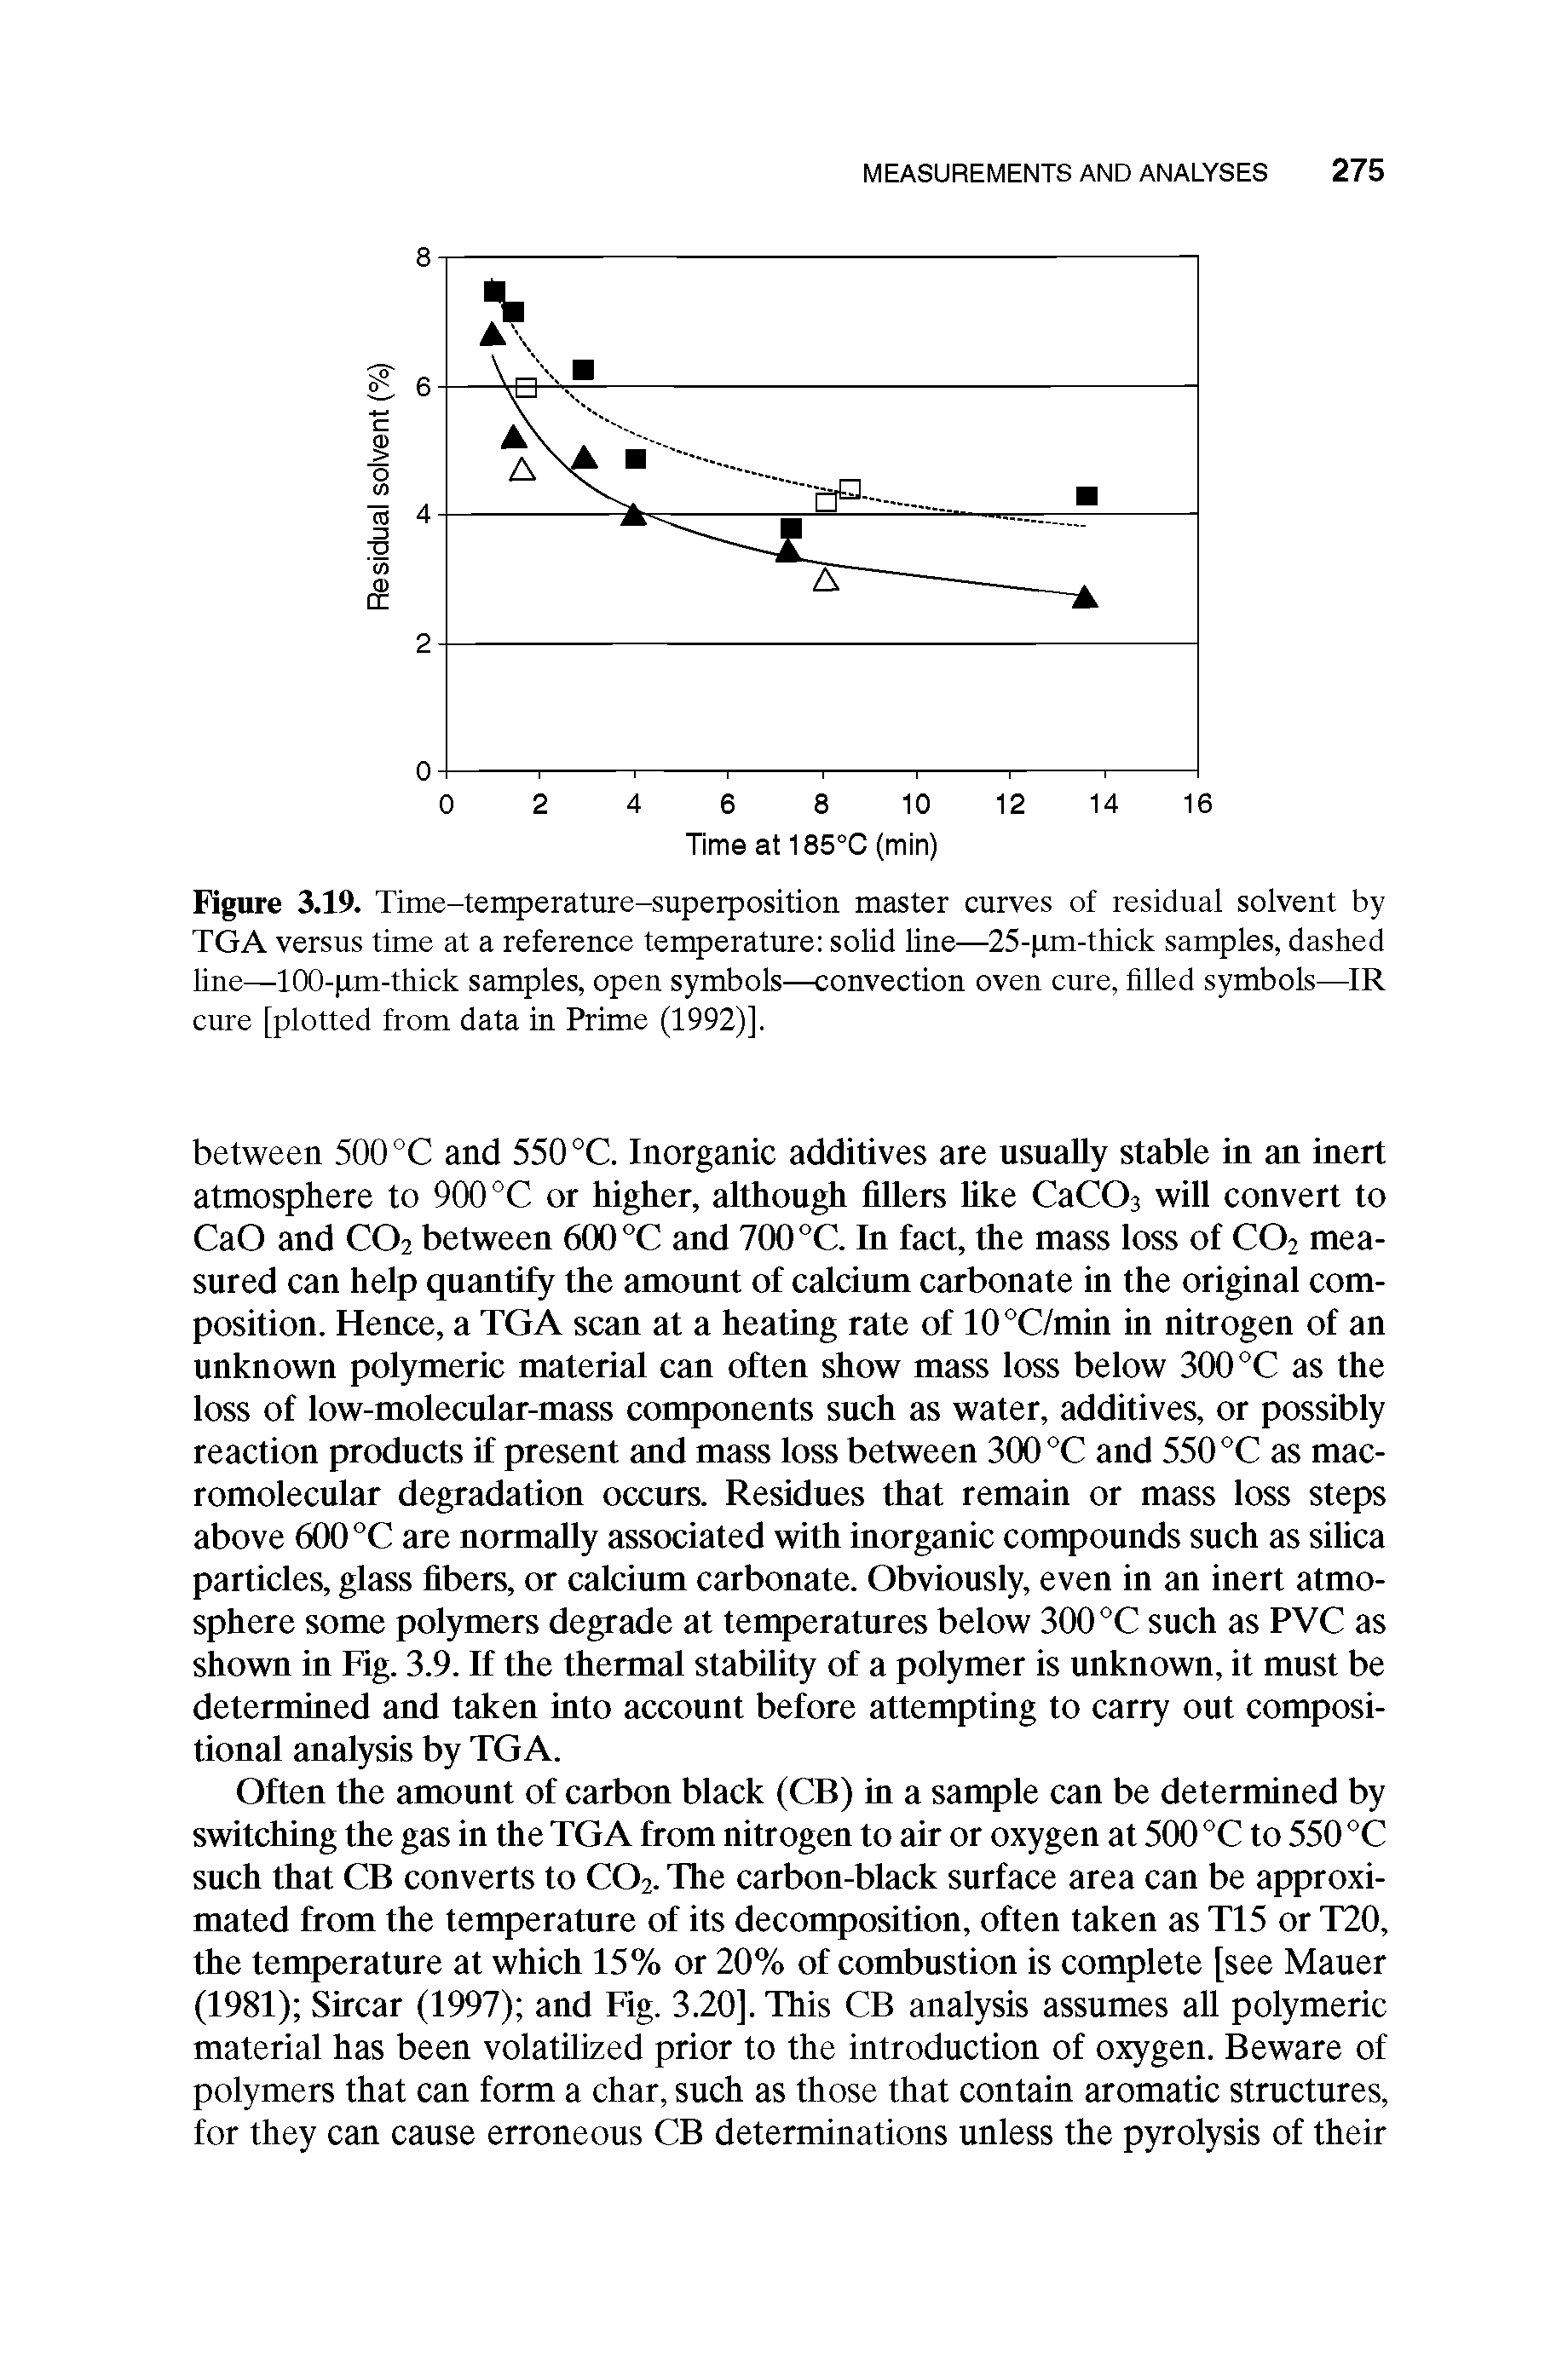 Figure 3.19. Time-temperature-superposition master curves of residual solvent by TGA versus time at a reference temperature solid line—25- xm-thick samples, dashed line—100- xm-thick samples, open symbols—convection oven cure, filled symbols—IR cure [plotted from data in Prime (1992)].